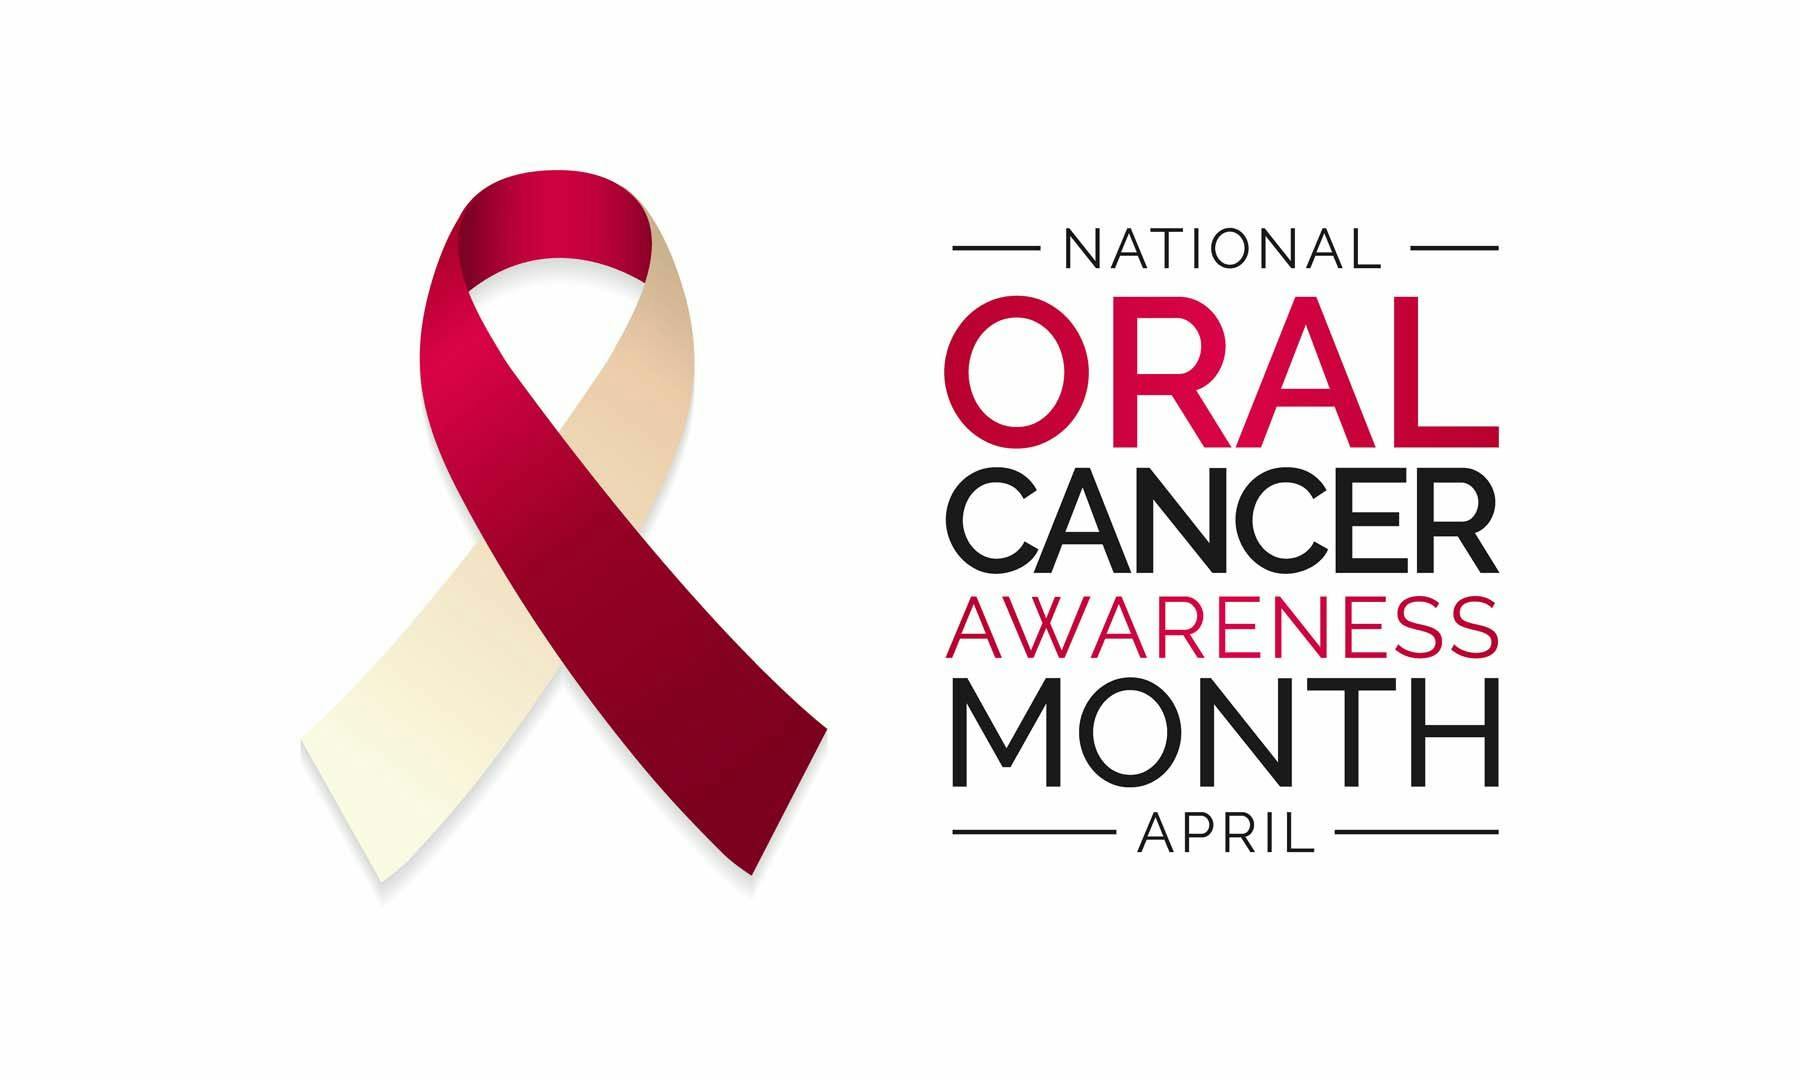 A Look Back at Some Important Oral Cancer Awareness Articles  | Image Credit: © Waseem Ali Khan - stock.adobe.com